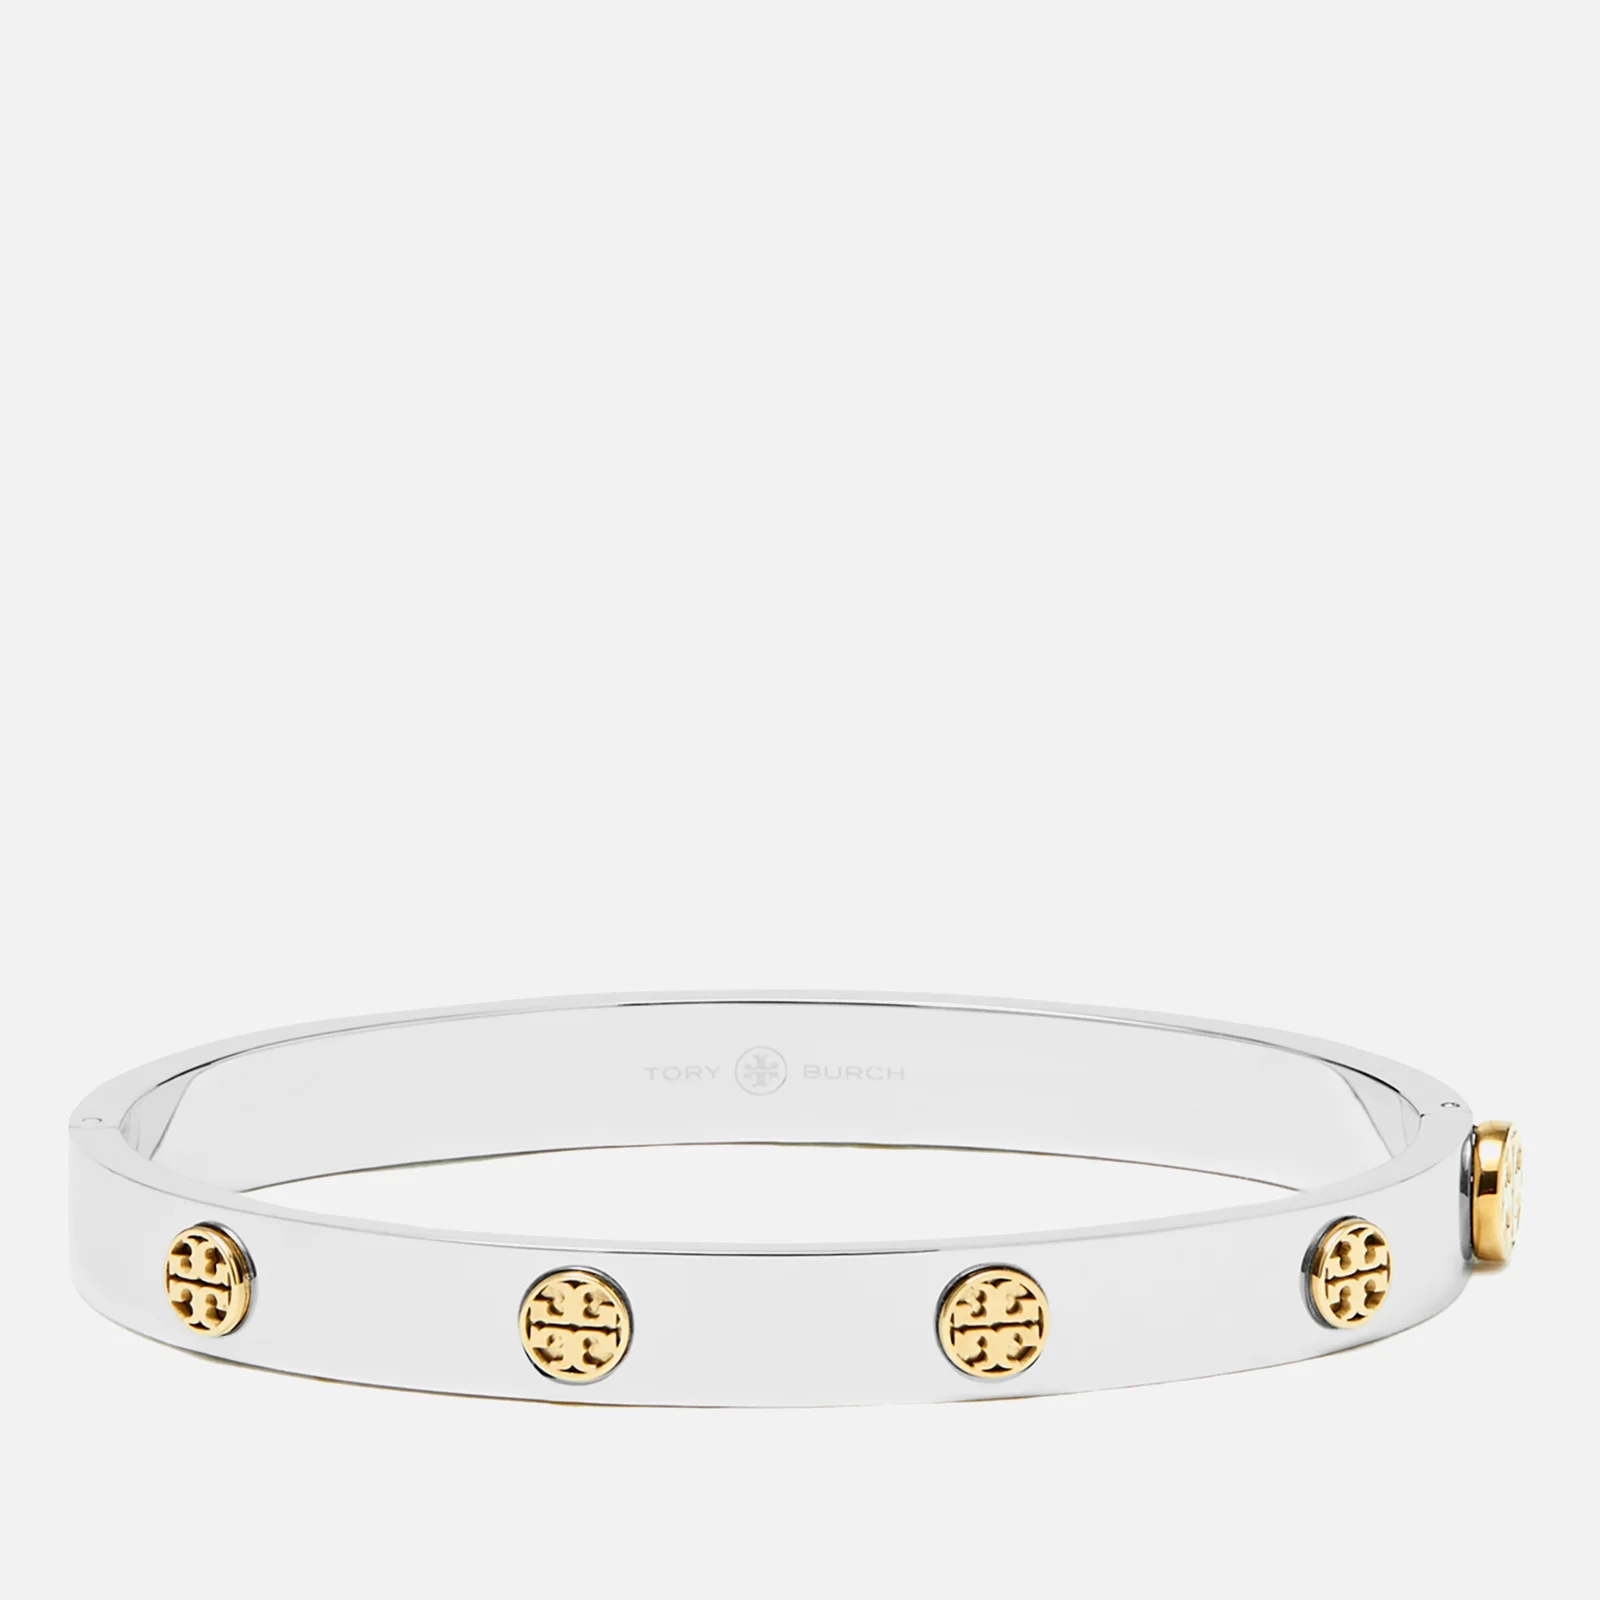 Tory Burch Miller Stainless Steel and Gold-Tone Bracelet Image 1